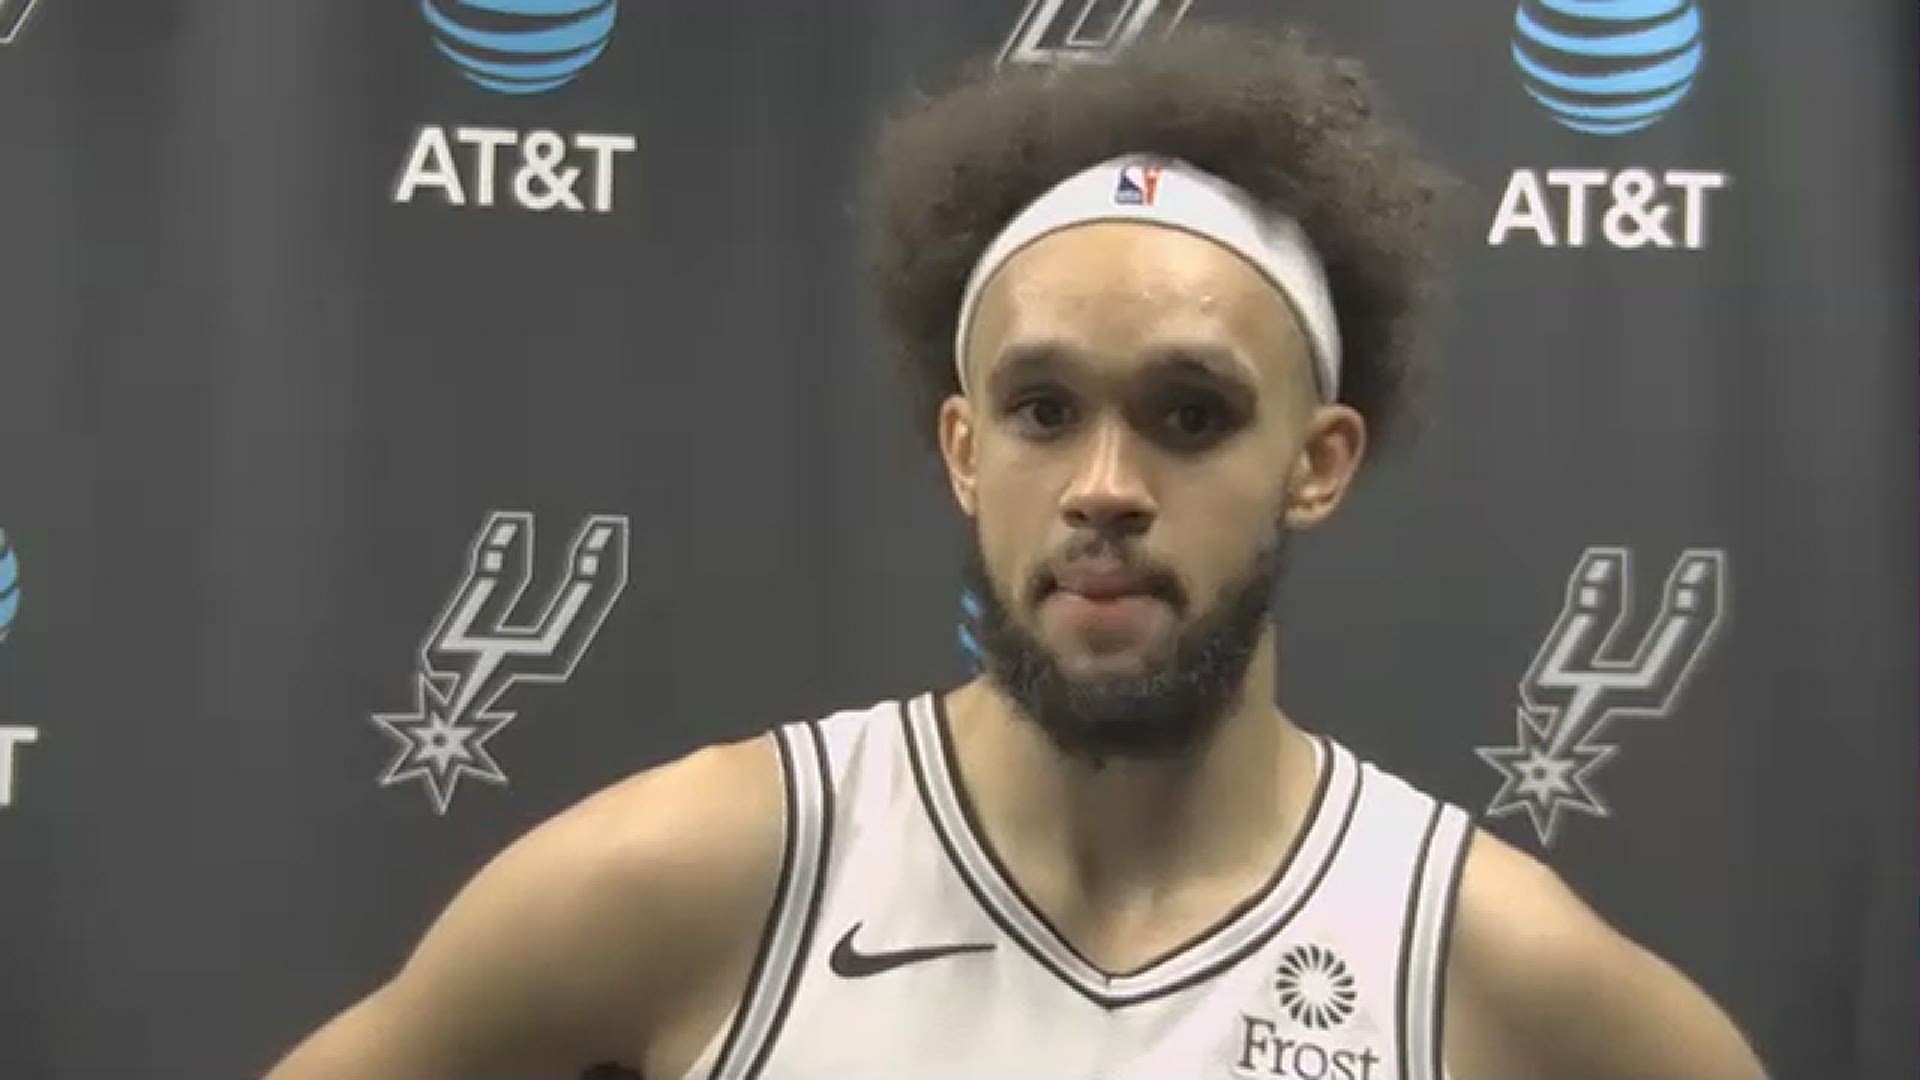 White spoke about how the Spurs got back on track with a win, and joked that he should have a punch card for his dentist because he goes so much.